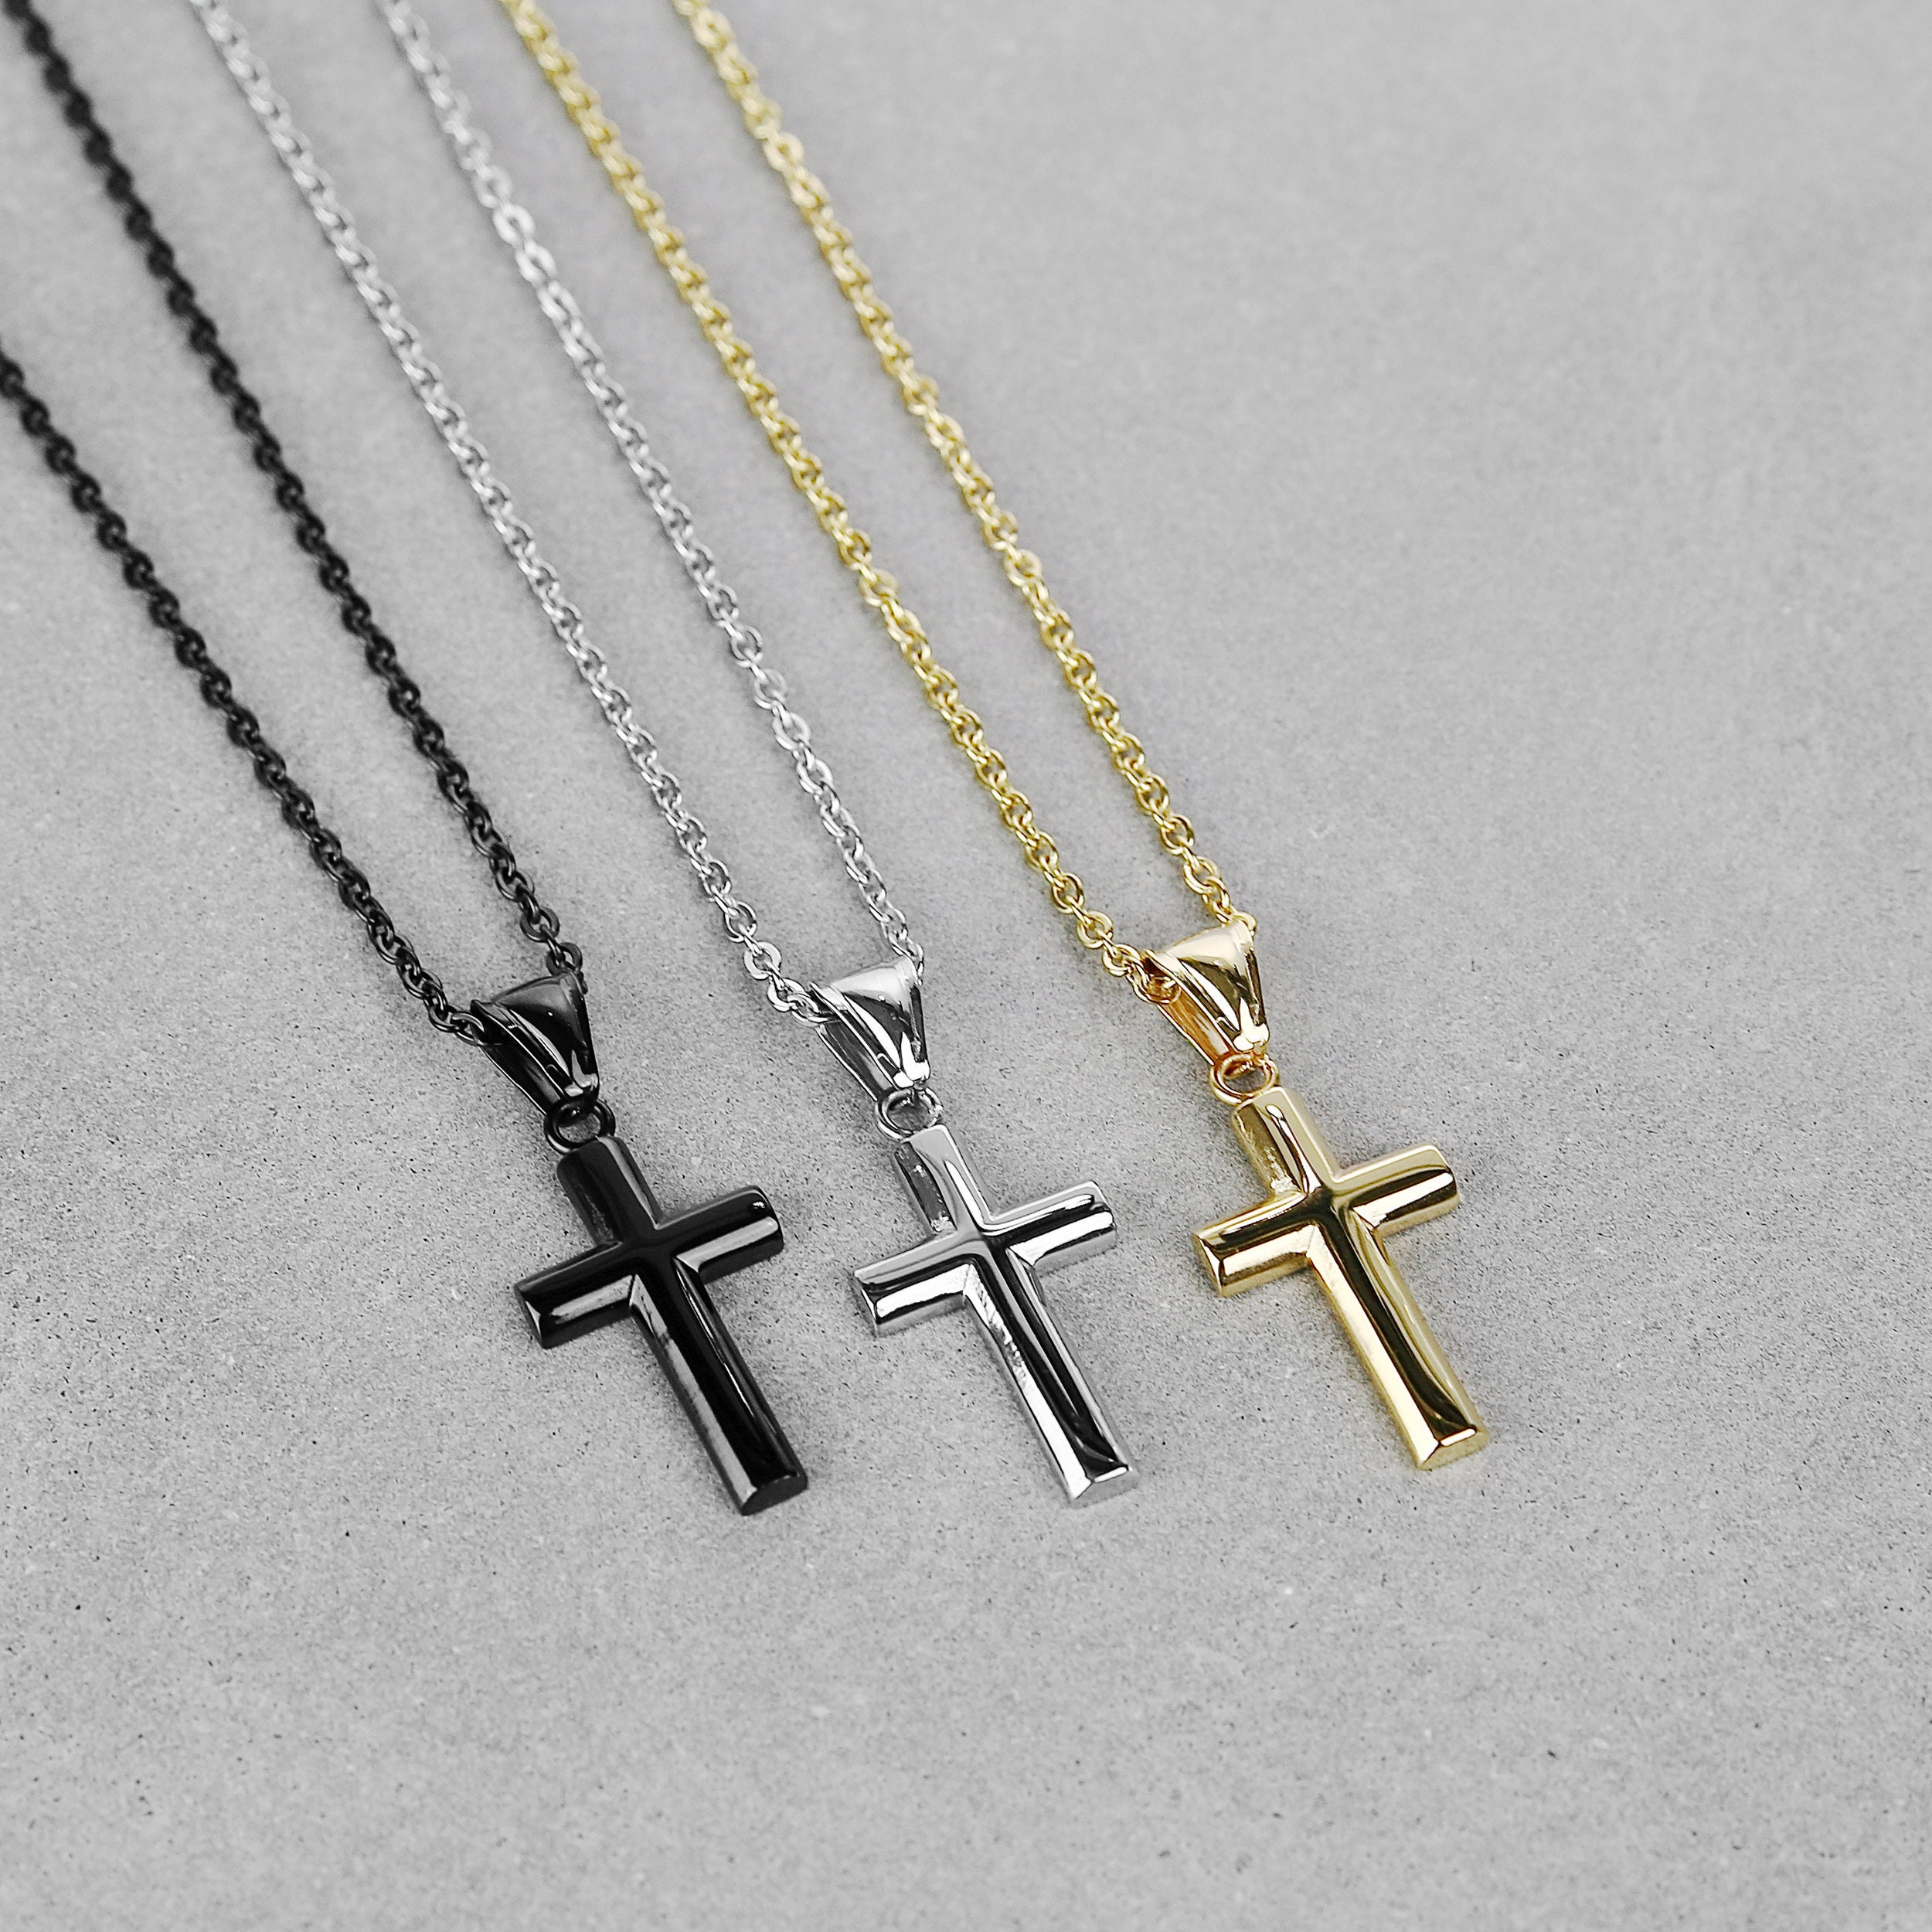 Amazon.com: JIAHATE Cross Necklace for Boys,Men Necklace Retro Thread  Simple Titanium Crucifix Cross Pendant Necklace Stainless Steel Chain,Black  Necklace: Clothing, Shoes & Jewelry